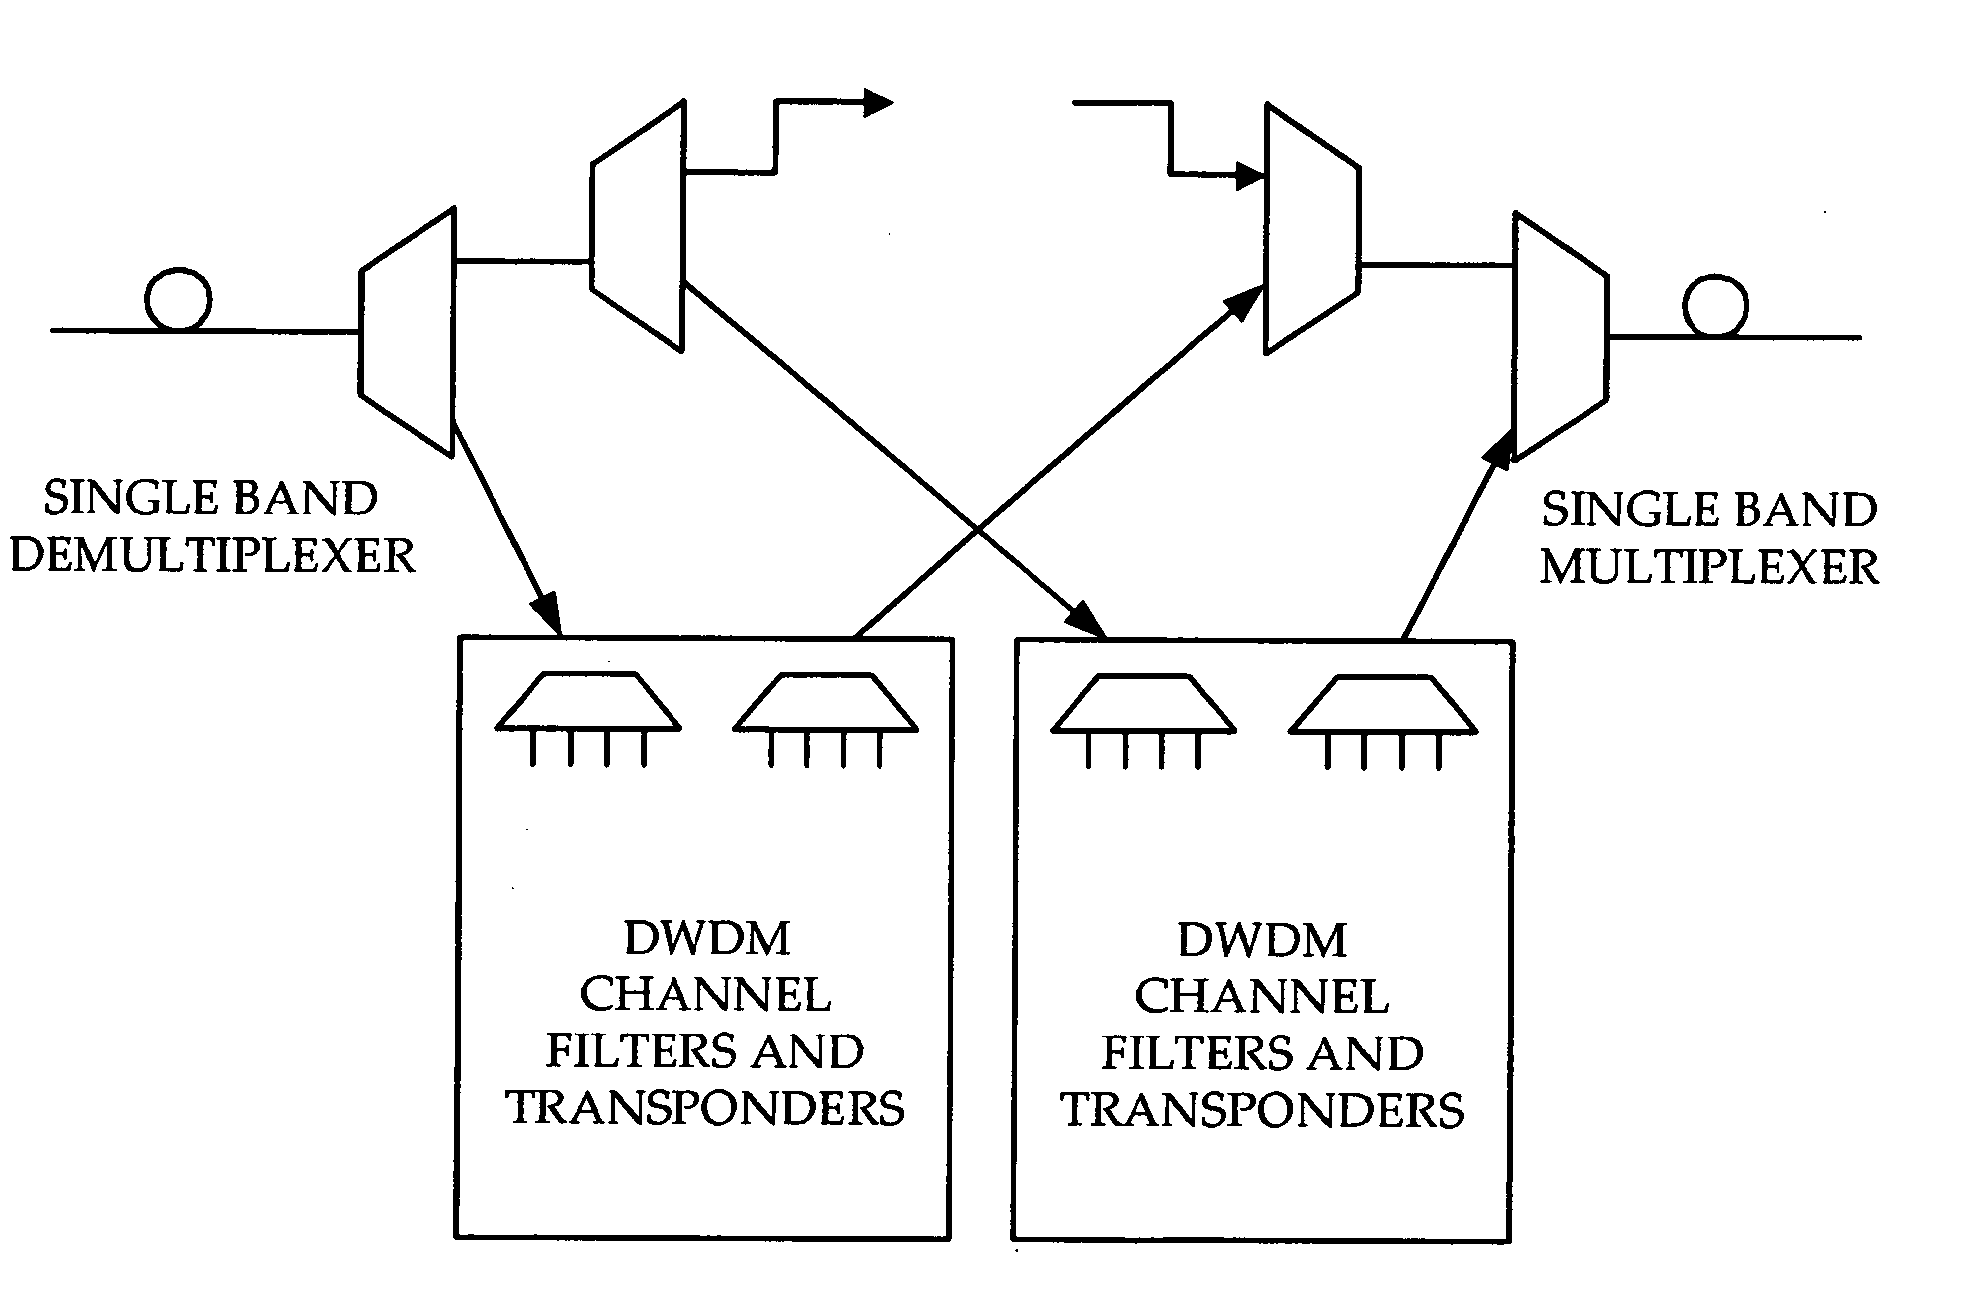 Multi-band architecture for DWDM rings